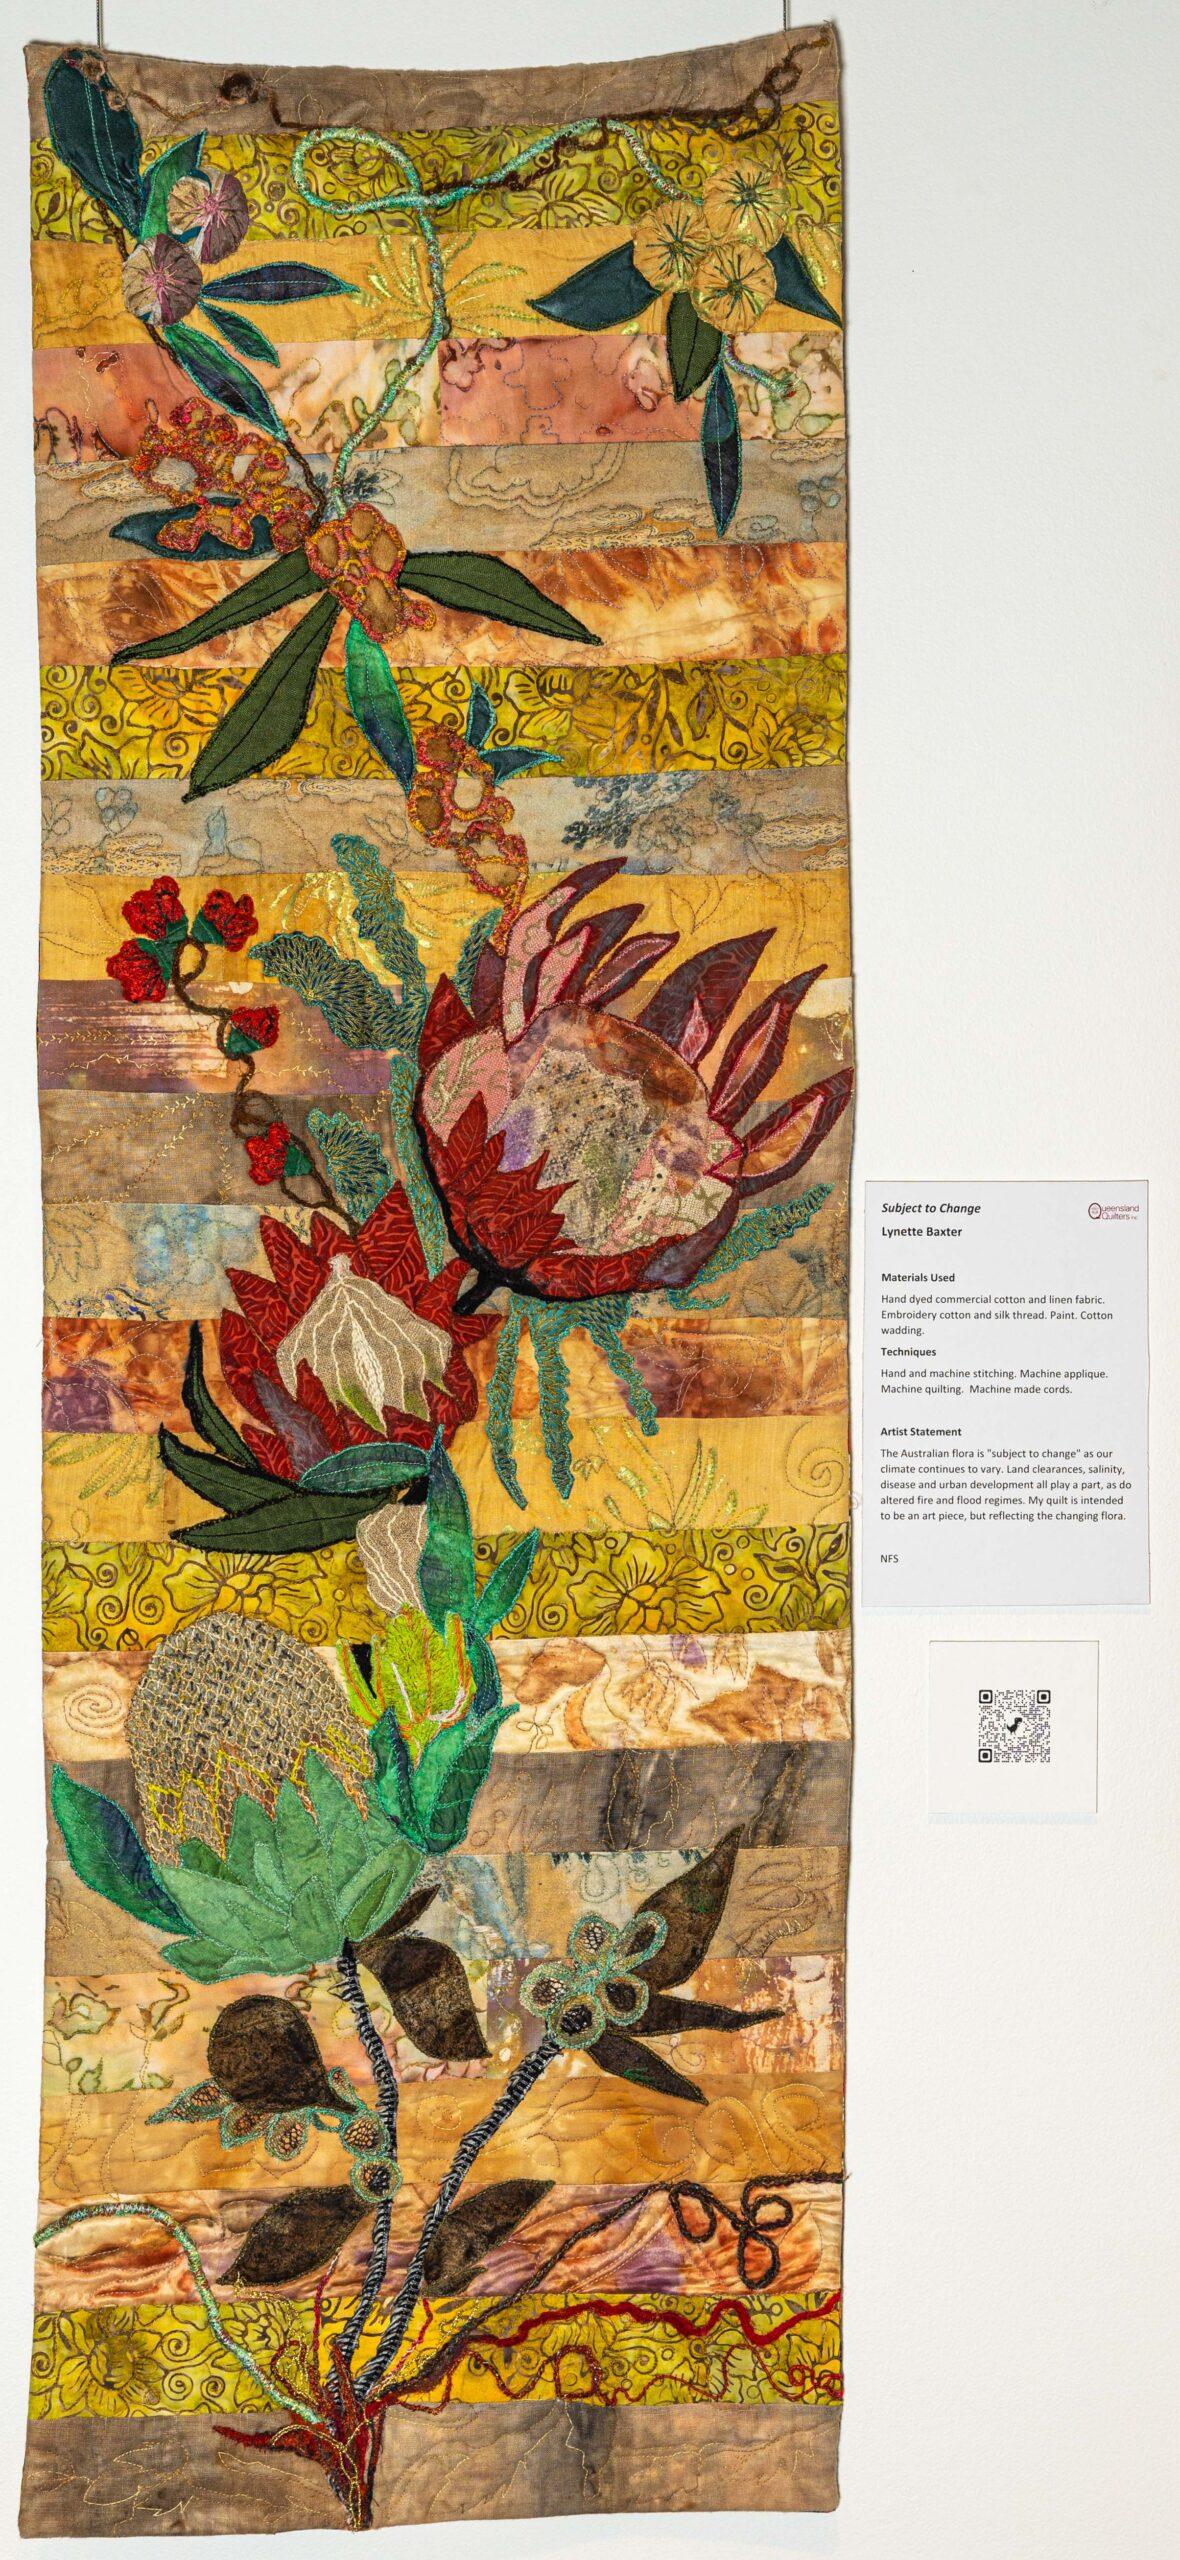 Lyn Baxter's quilt "Subject to Change" for the 'Flora' exhibition of SOTA 23.